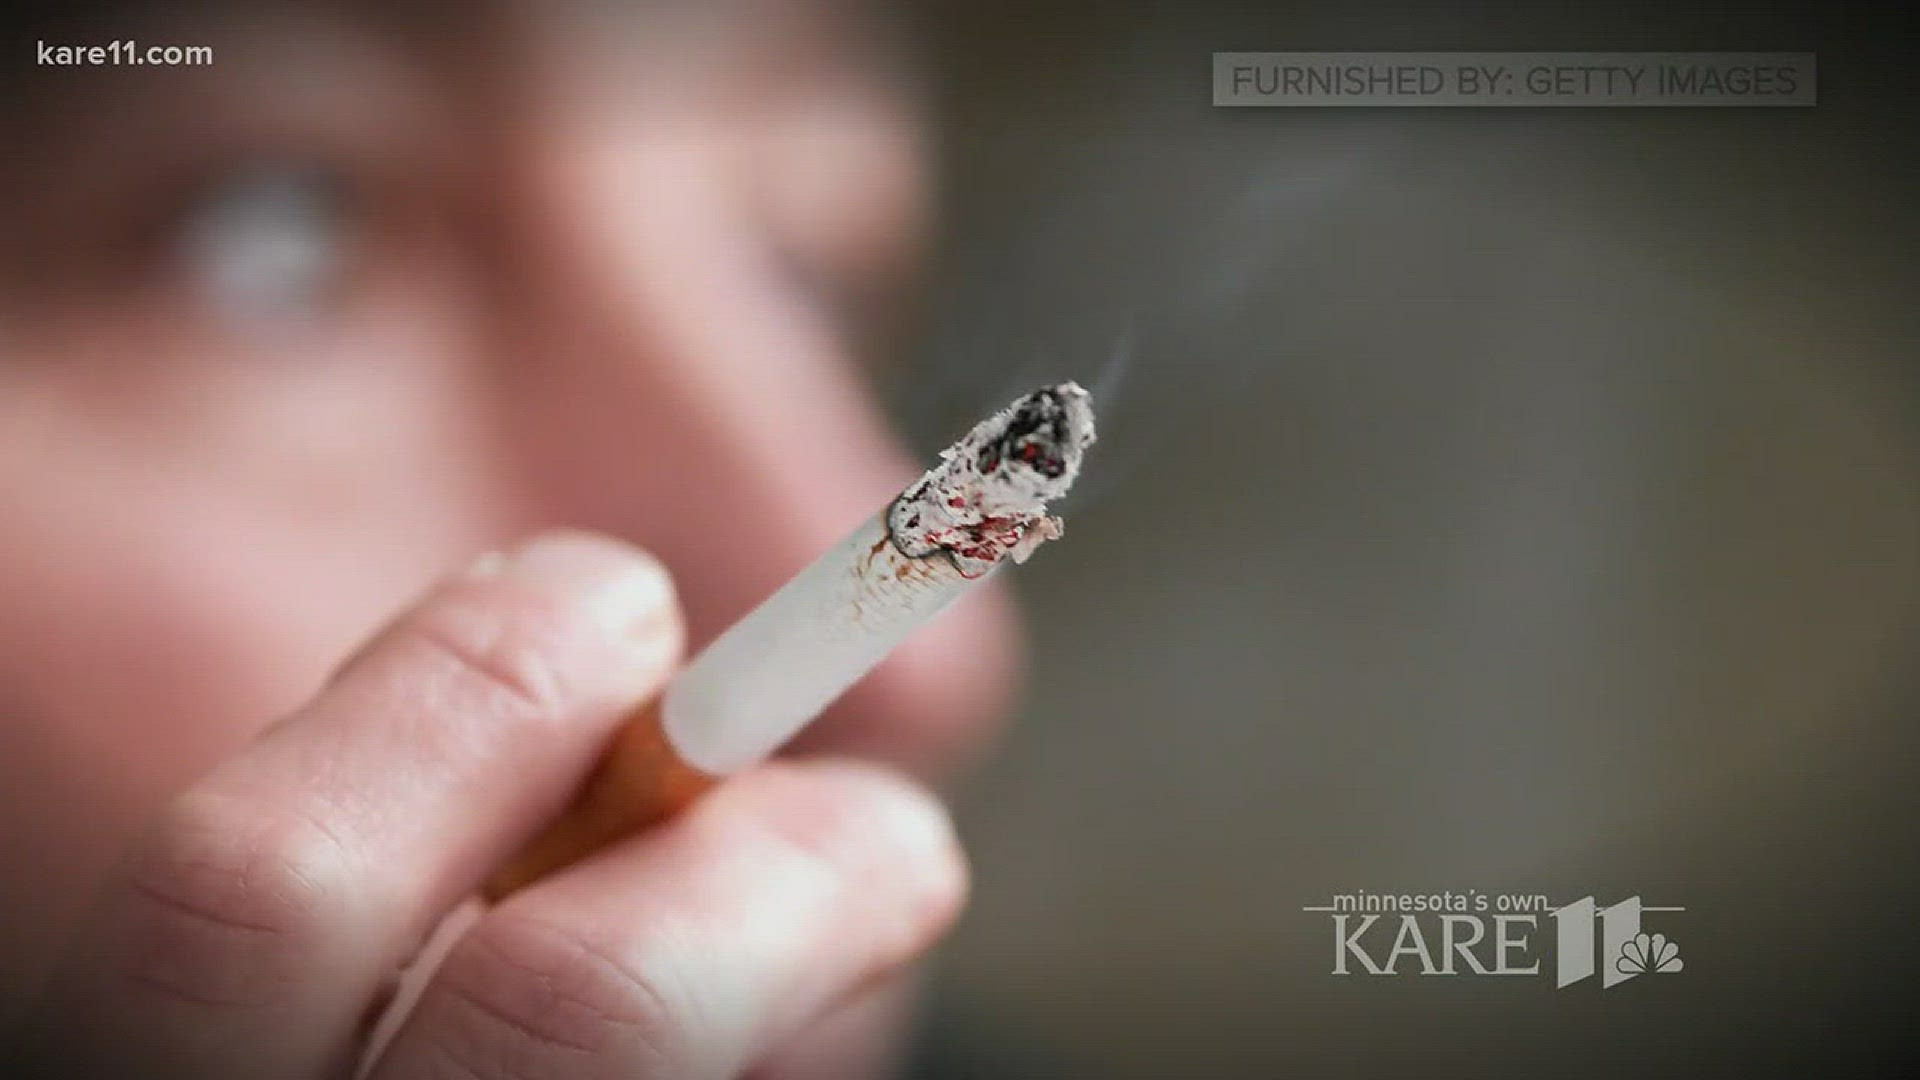 Philip Morris' New Year's resolution? Give up cigarettes